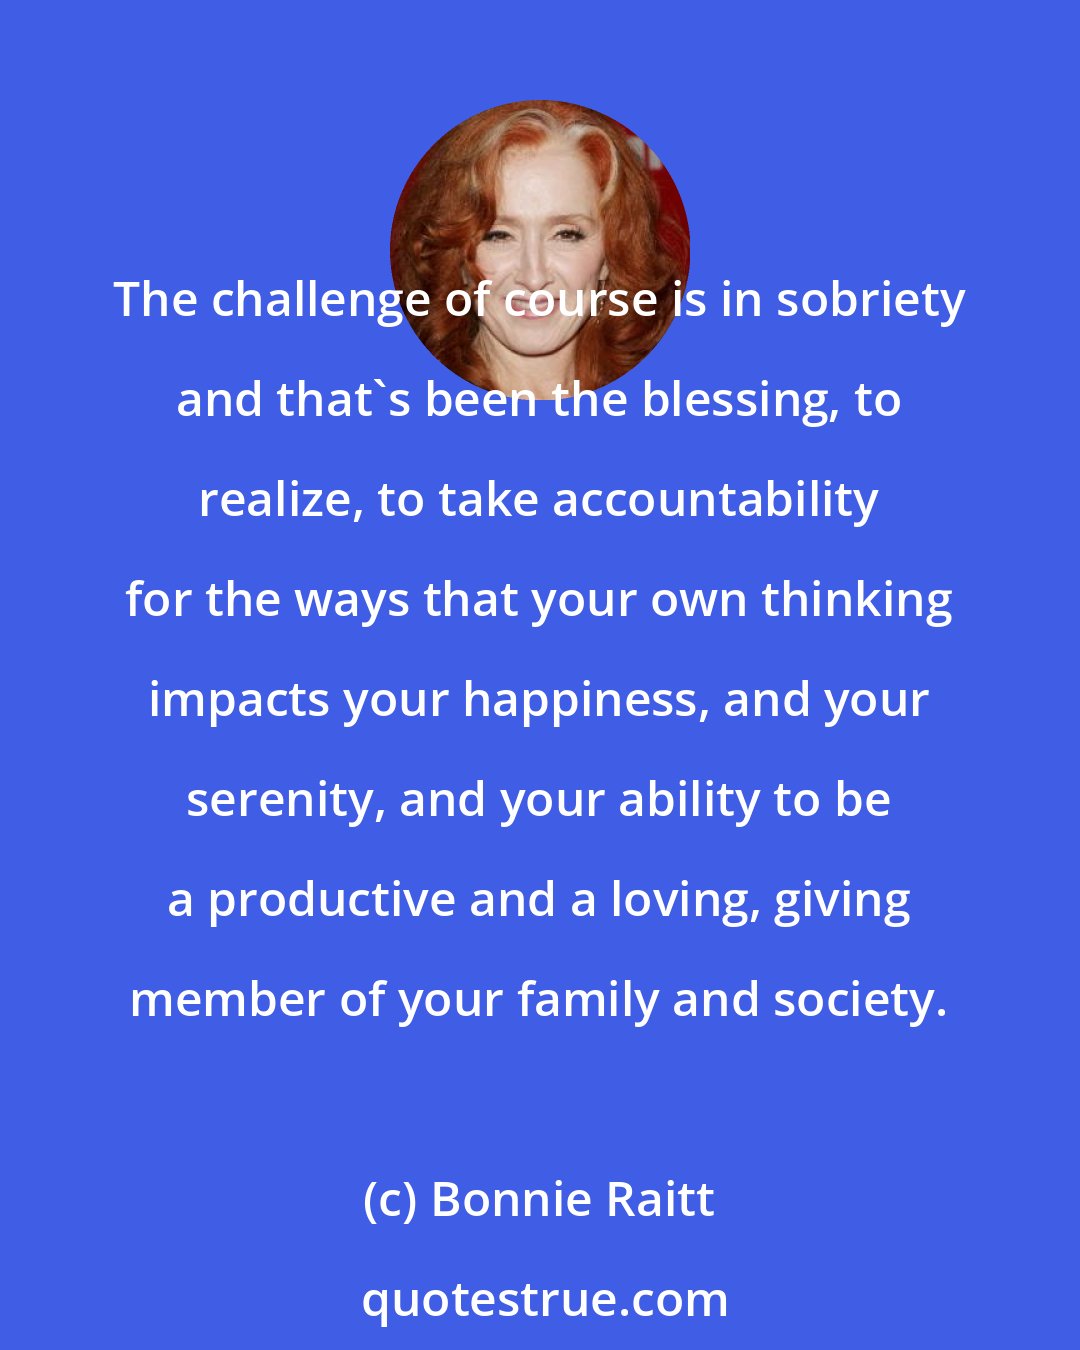 Bonnie Raitt: The challenge of course is in sobriety and that's been the blessing, to realize, to take accountability for the ways that your own thinking impacts your happiness, and your serenity, and your ability to be a productive and a loving, giving member of your family and society.